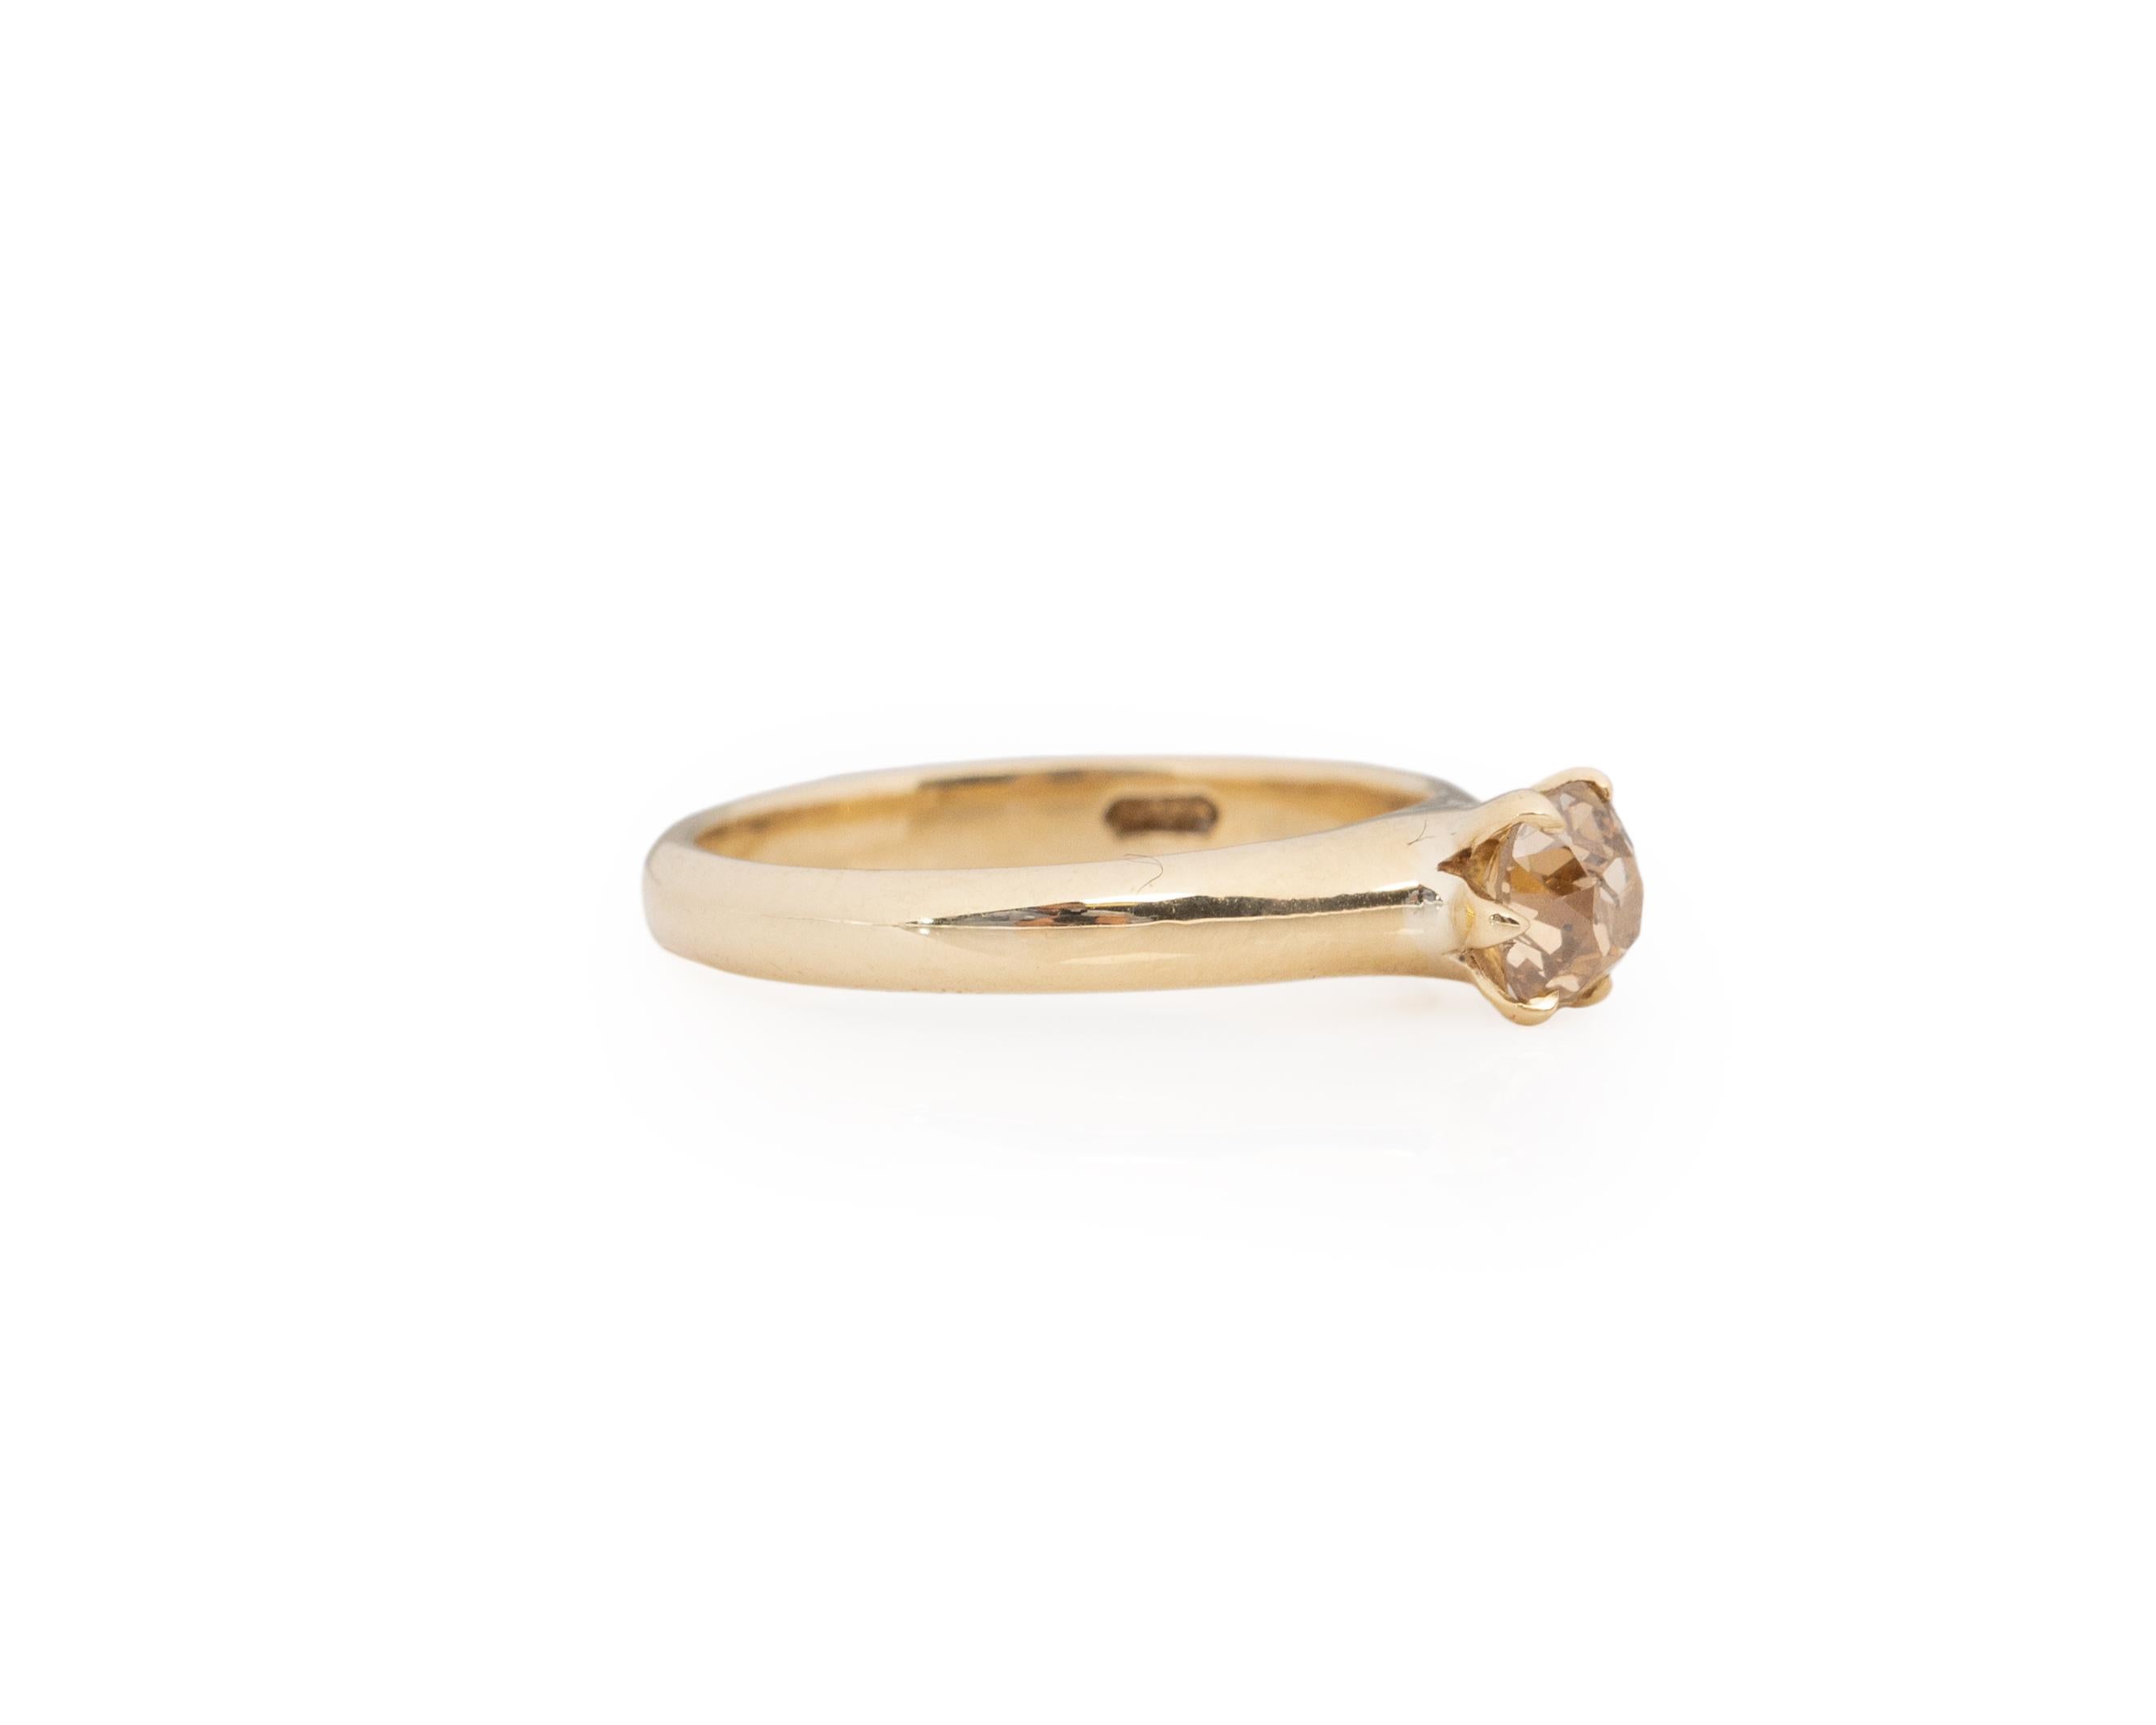 Metal Type: 14K Yellow Gold [Hallmarked, and Tested]
Weight: 3.5 grams

Center Diamond Details:
Weight: .65ct
Cut: Old Mine Brilliant - Antique Cushion
Color: Fancy Natural Brown (Cognac Color)
Clarity: I1

Finger to Top of Stone Measurement: